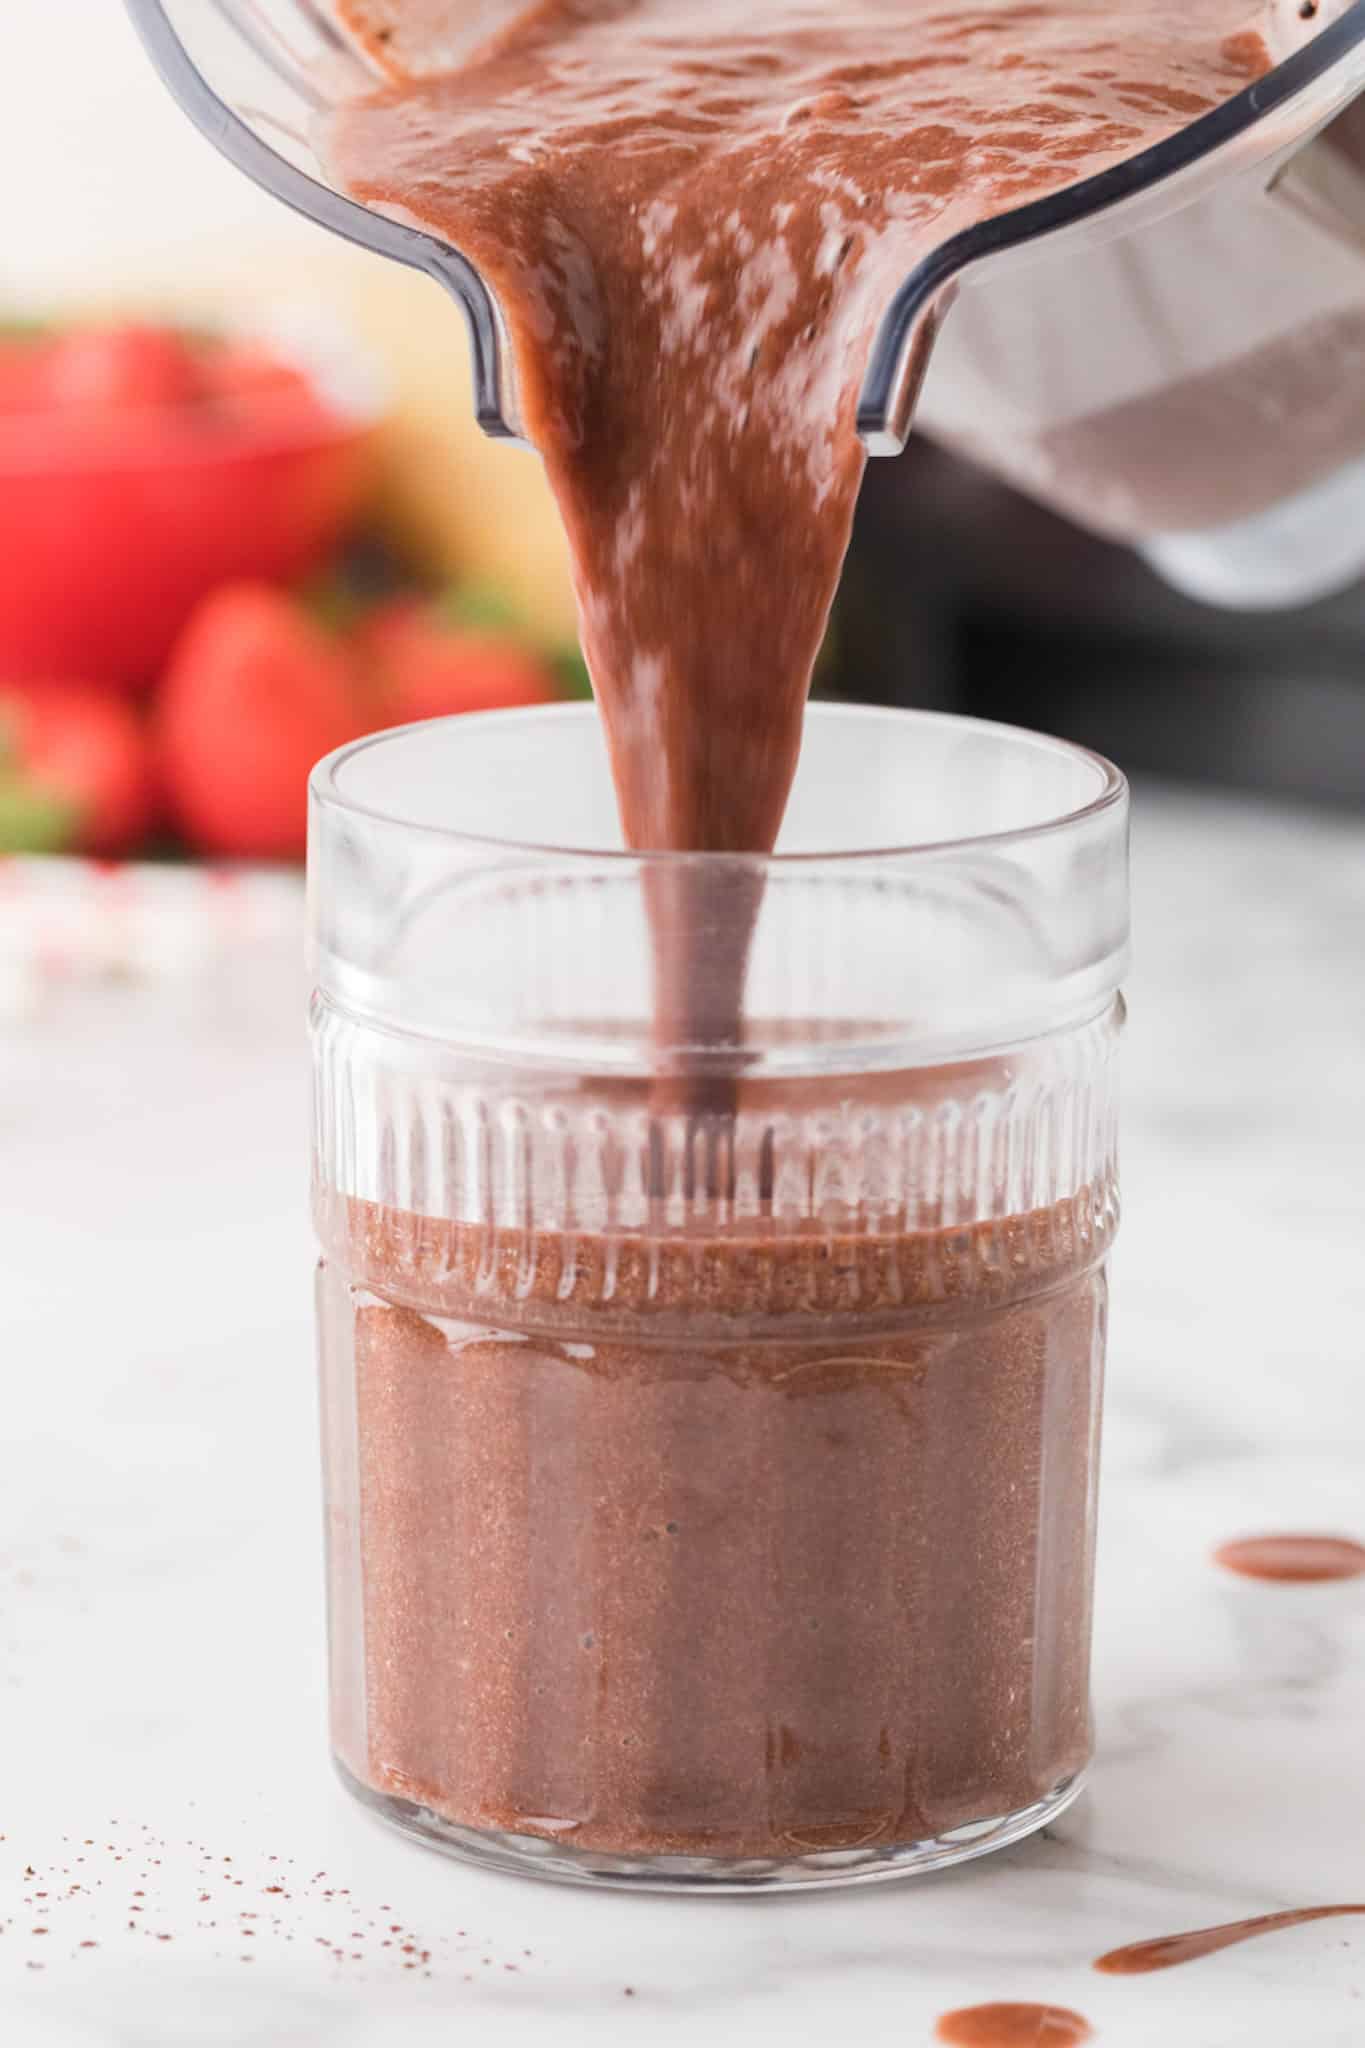 pouring chocolate smoothie into a glass.